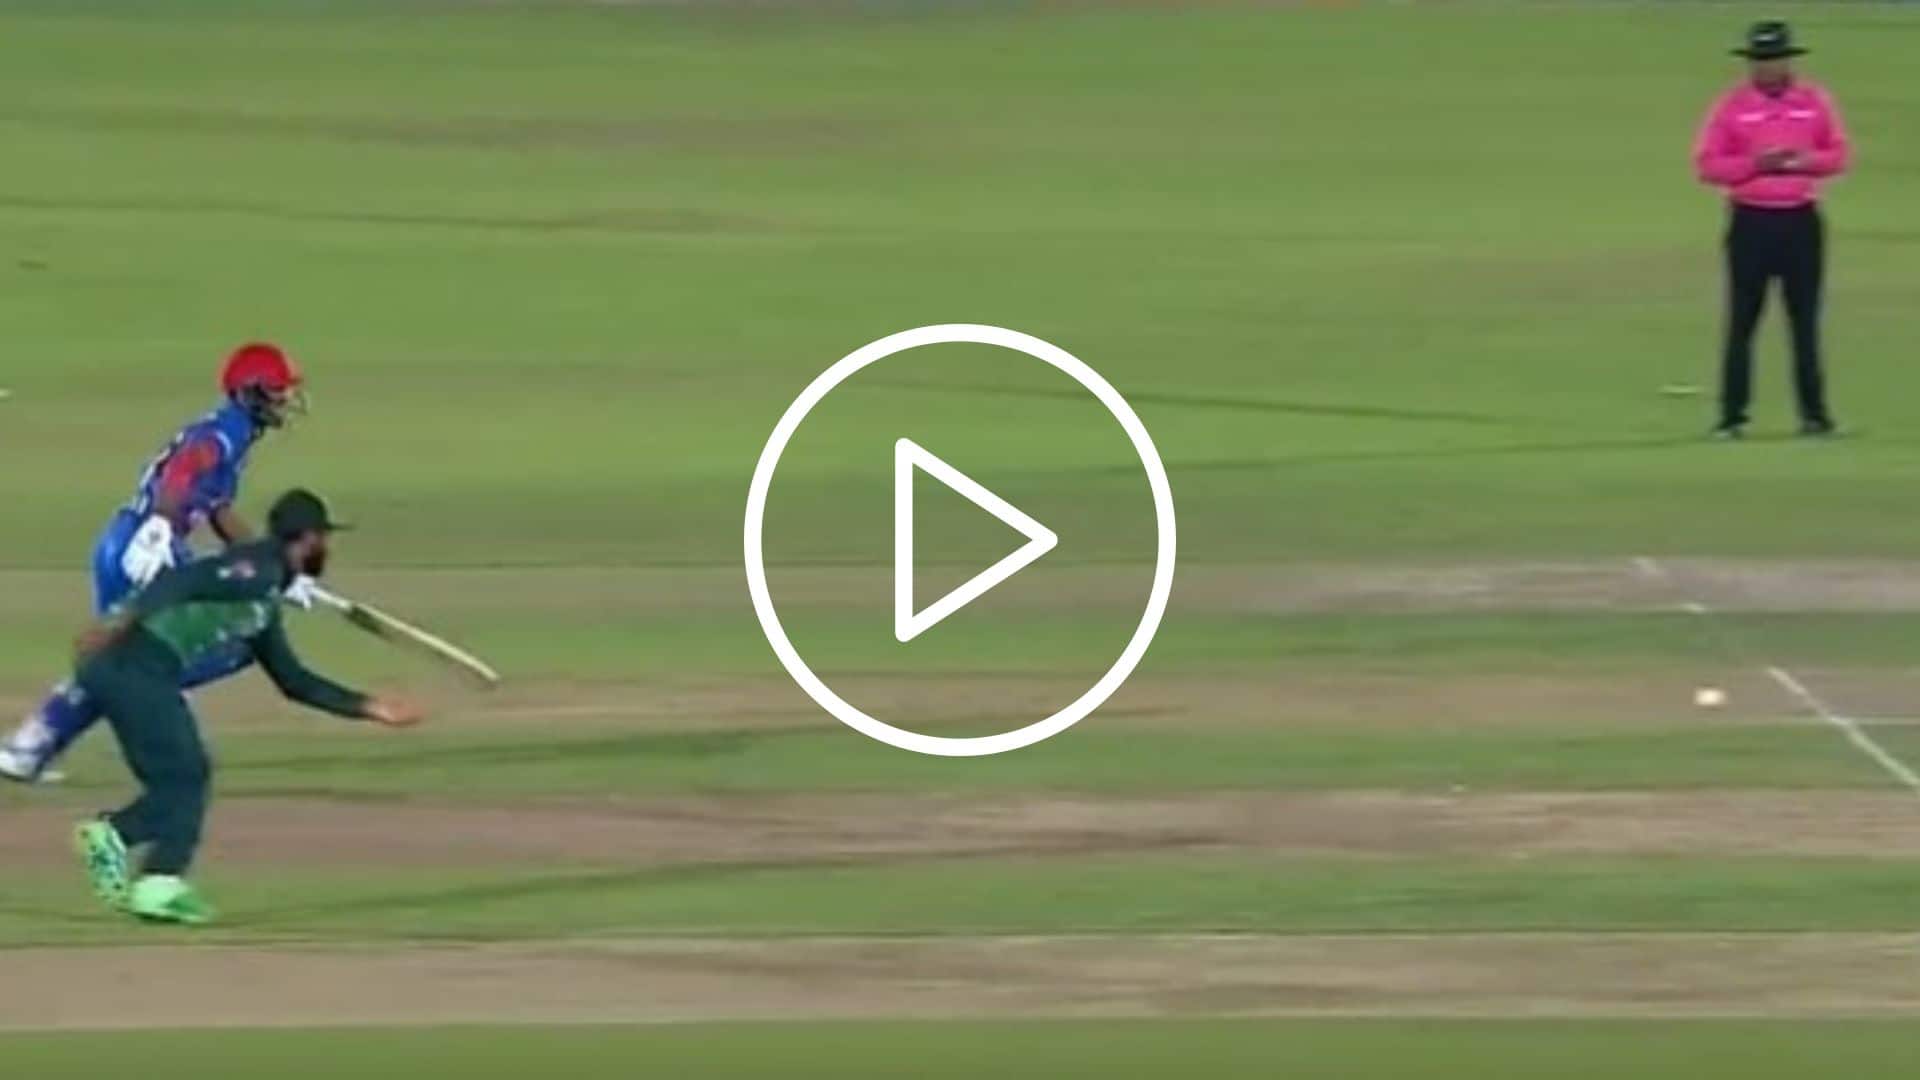 [Watch] Fakhar Zaman, Rizwan Produce Embarrassing Blunder To Miss Easy Run Out Chance